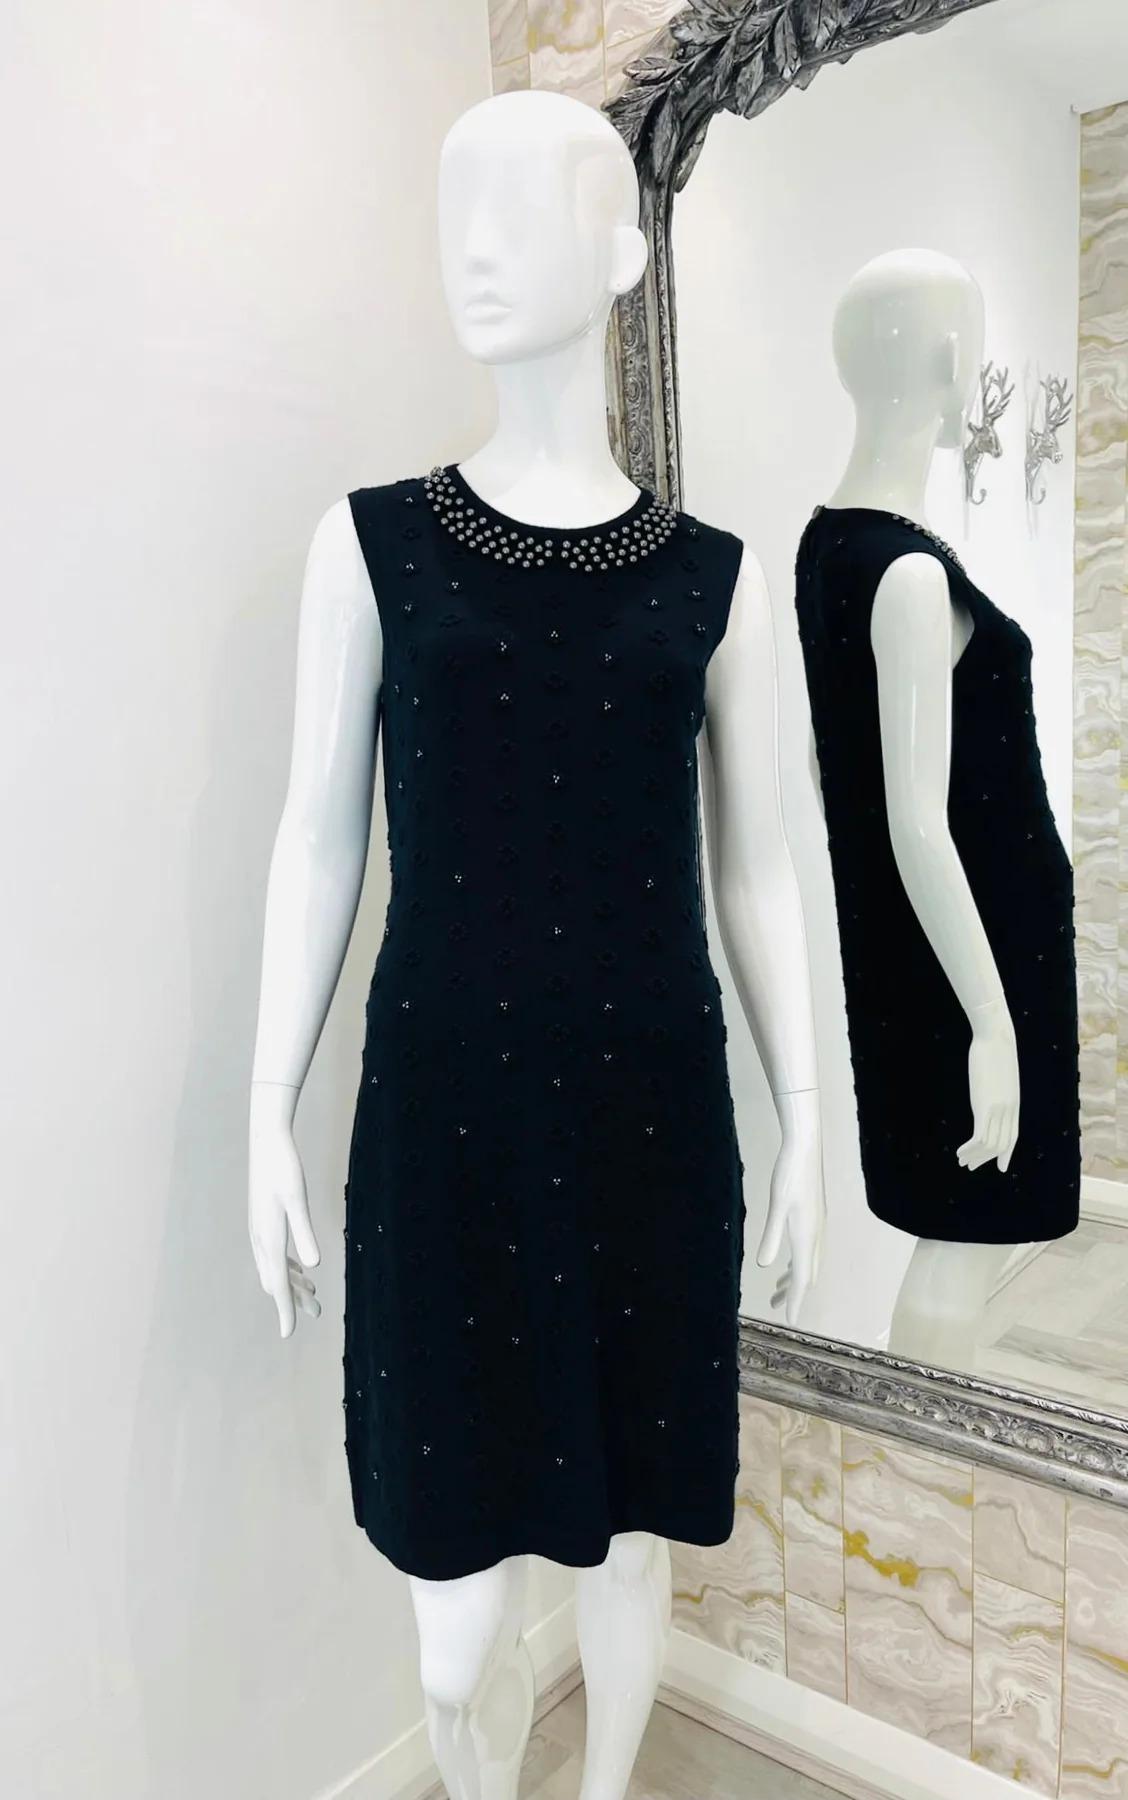 Chanel Cashmere & Pearl Dress

Black sleeveless dress which is adorned with dark silver pearls and knitted Camellia flowers.

Additional information:
Size – 42FR
Composition – Cashmere, Faux Pearls
Condition – Very Good